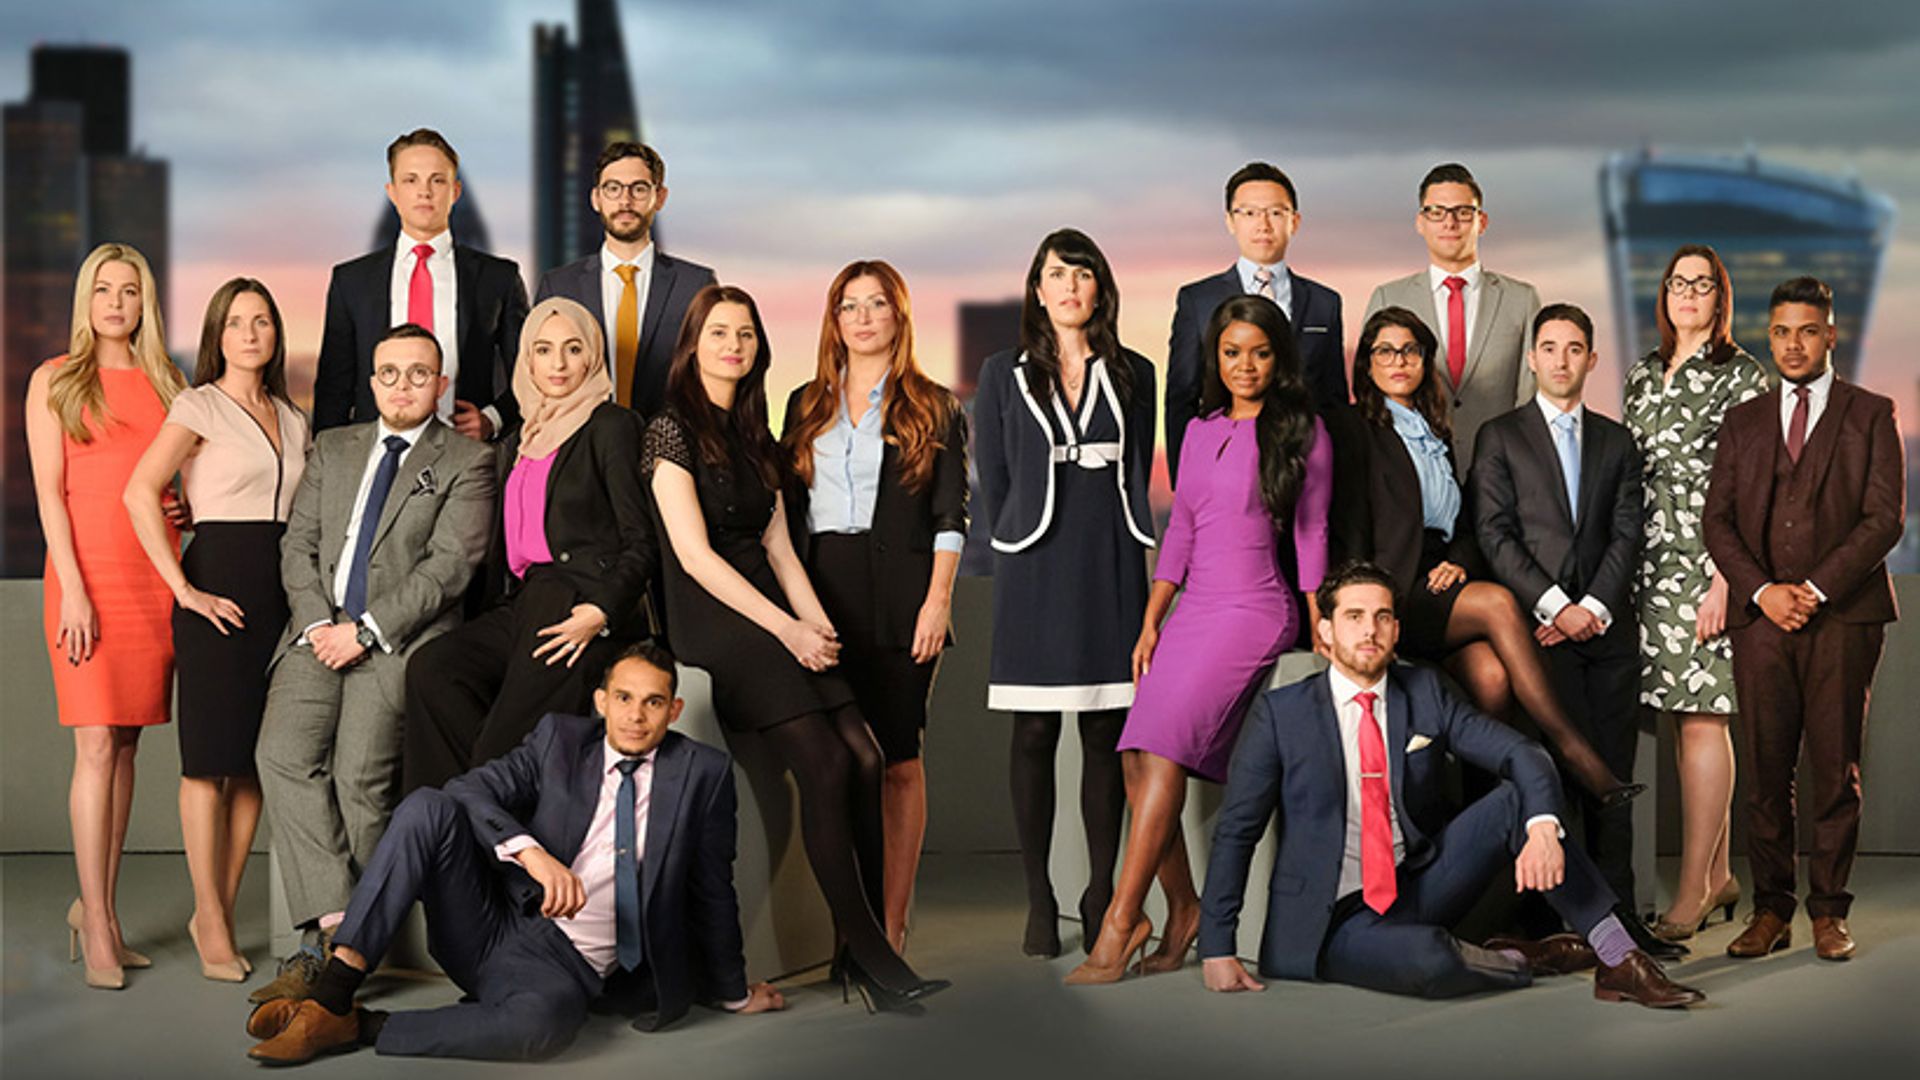 The Apprentice 2017: Meet the candidates